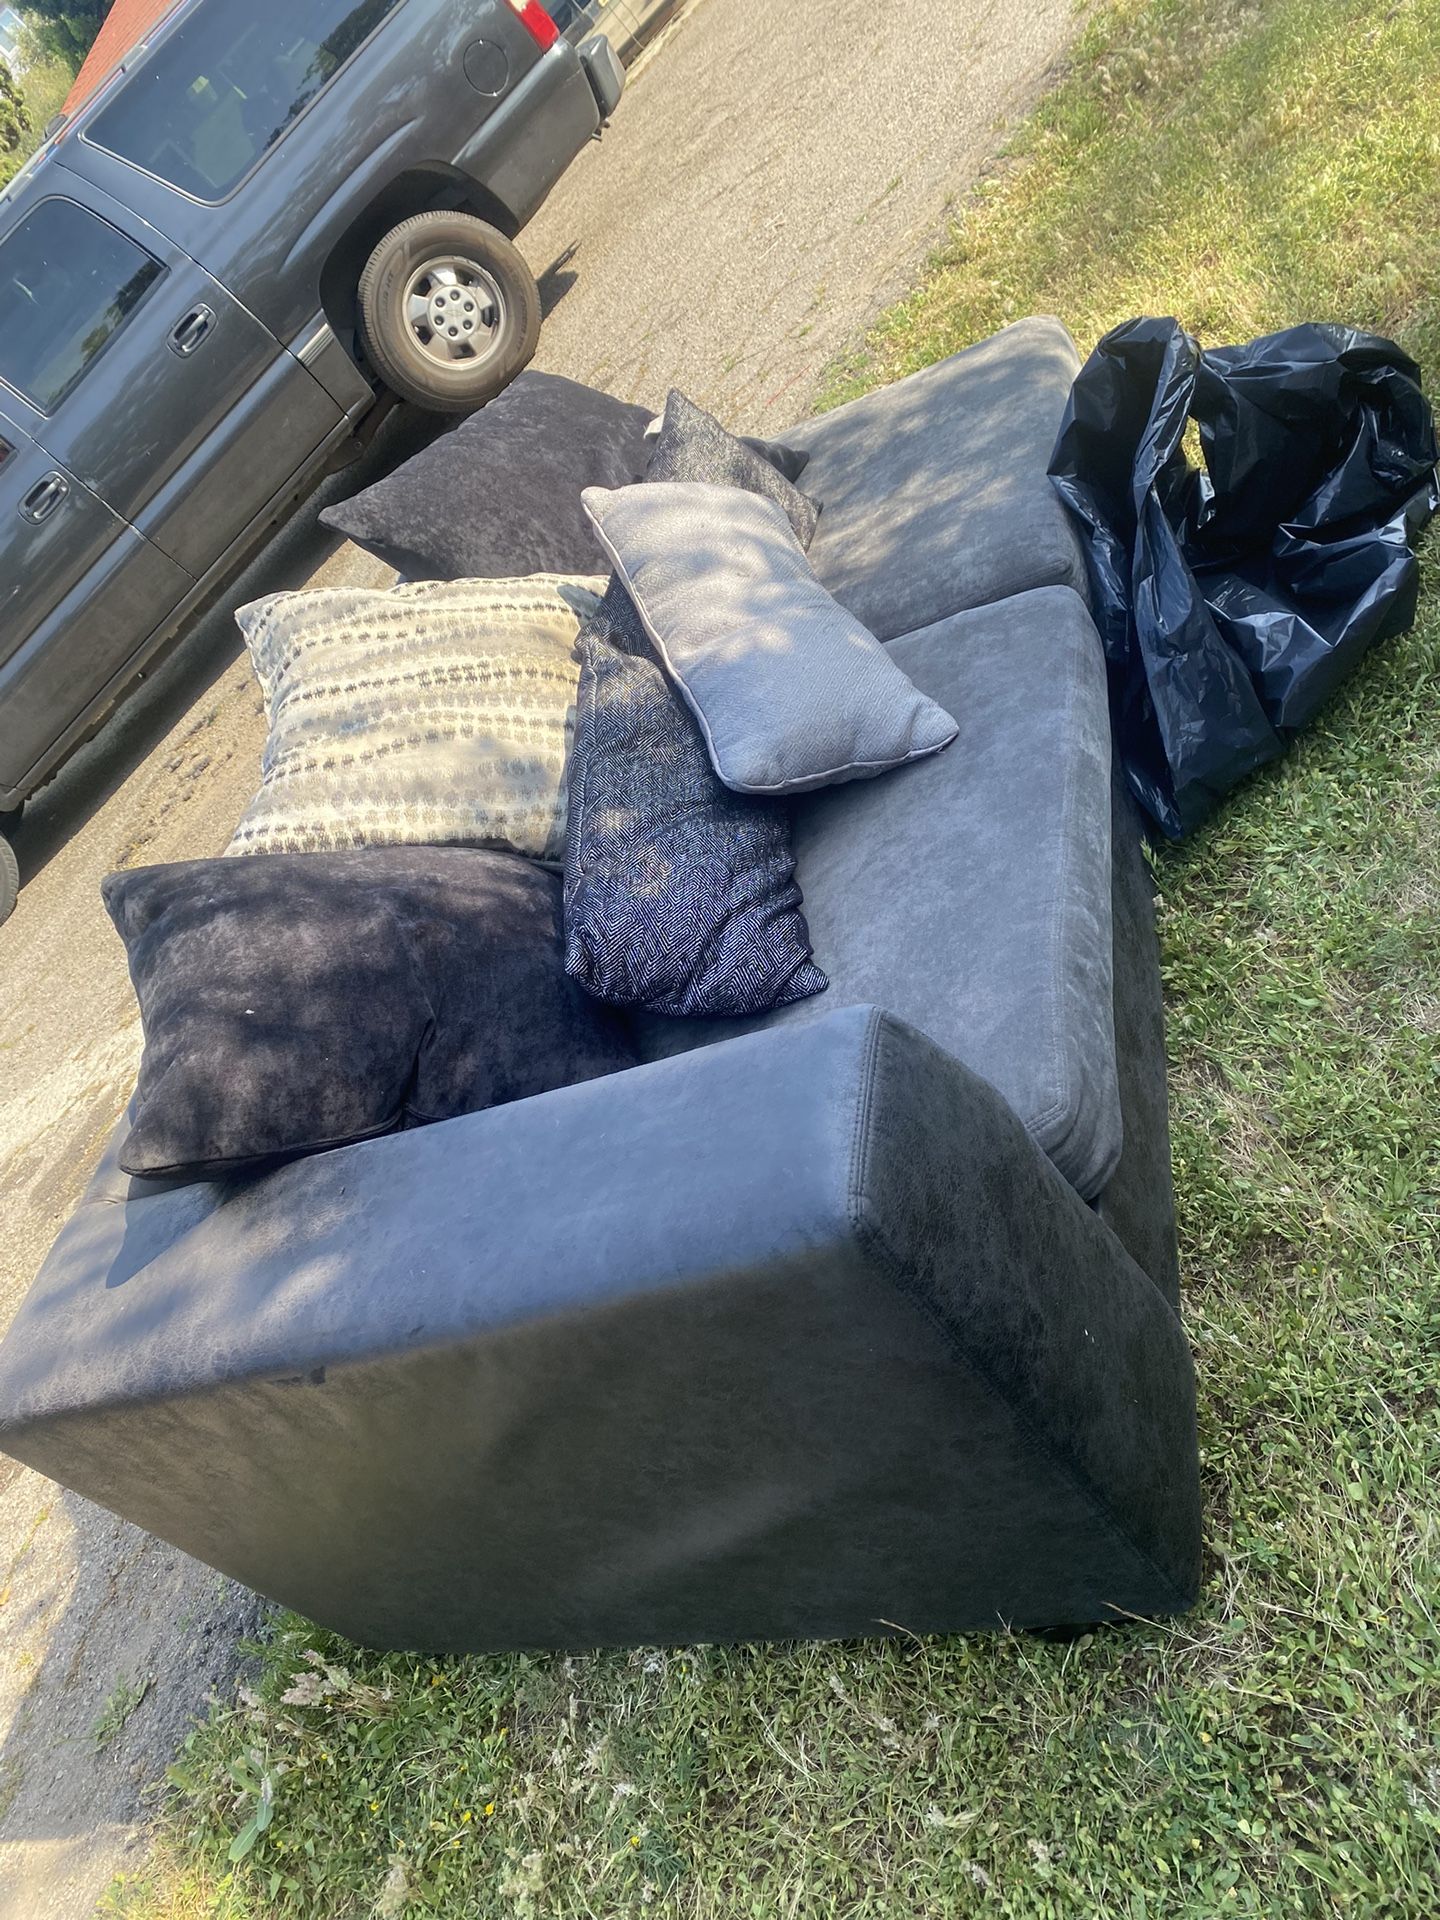 Free Couches 